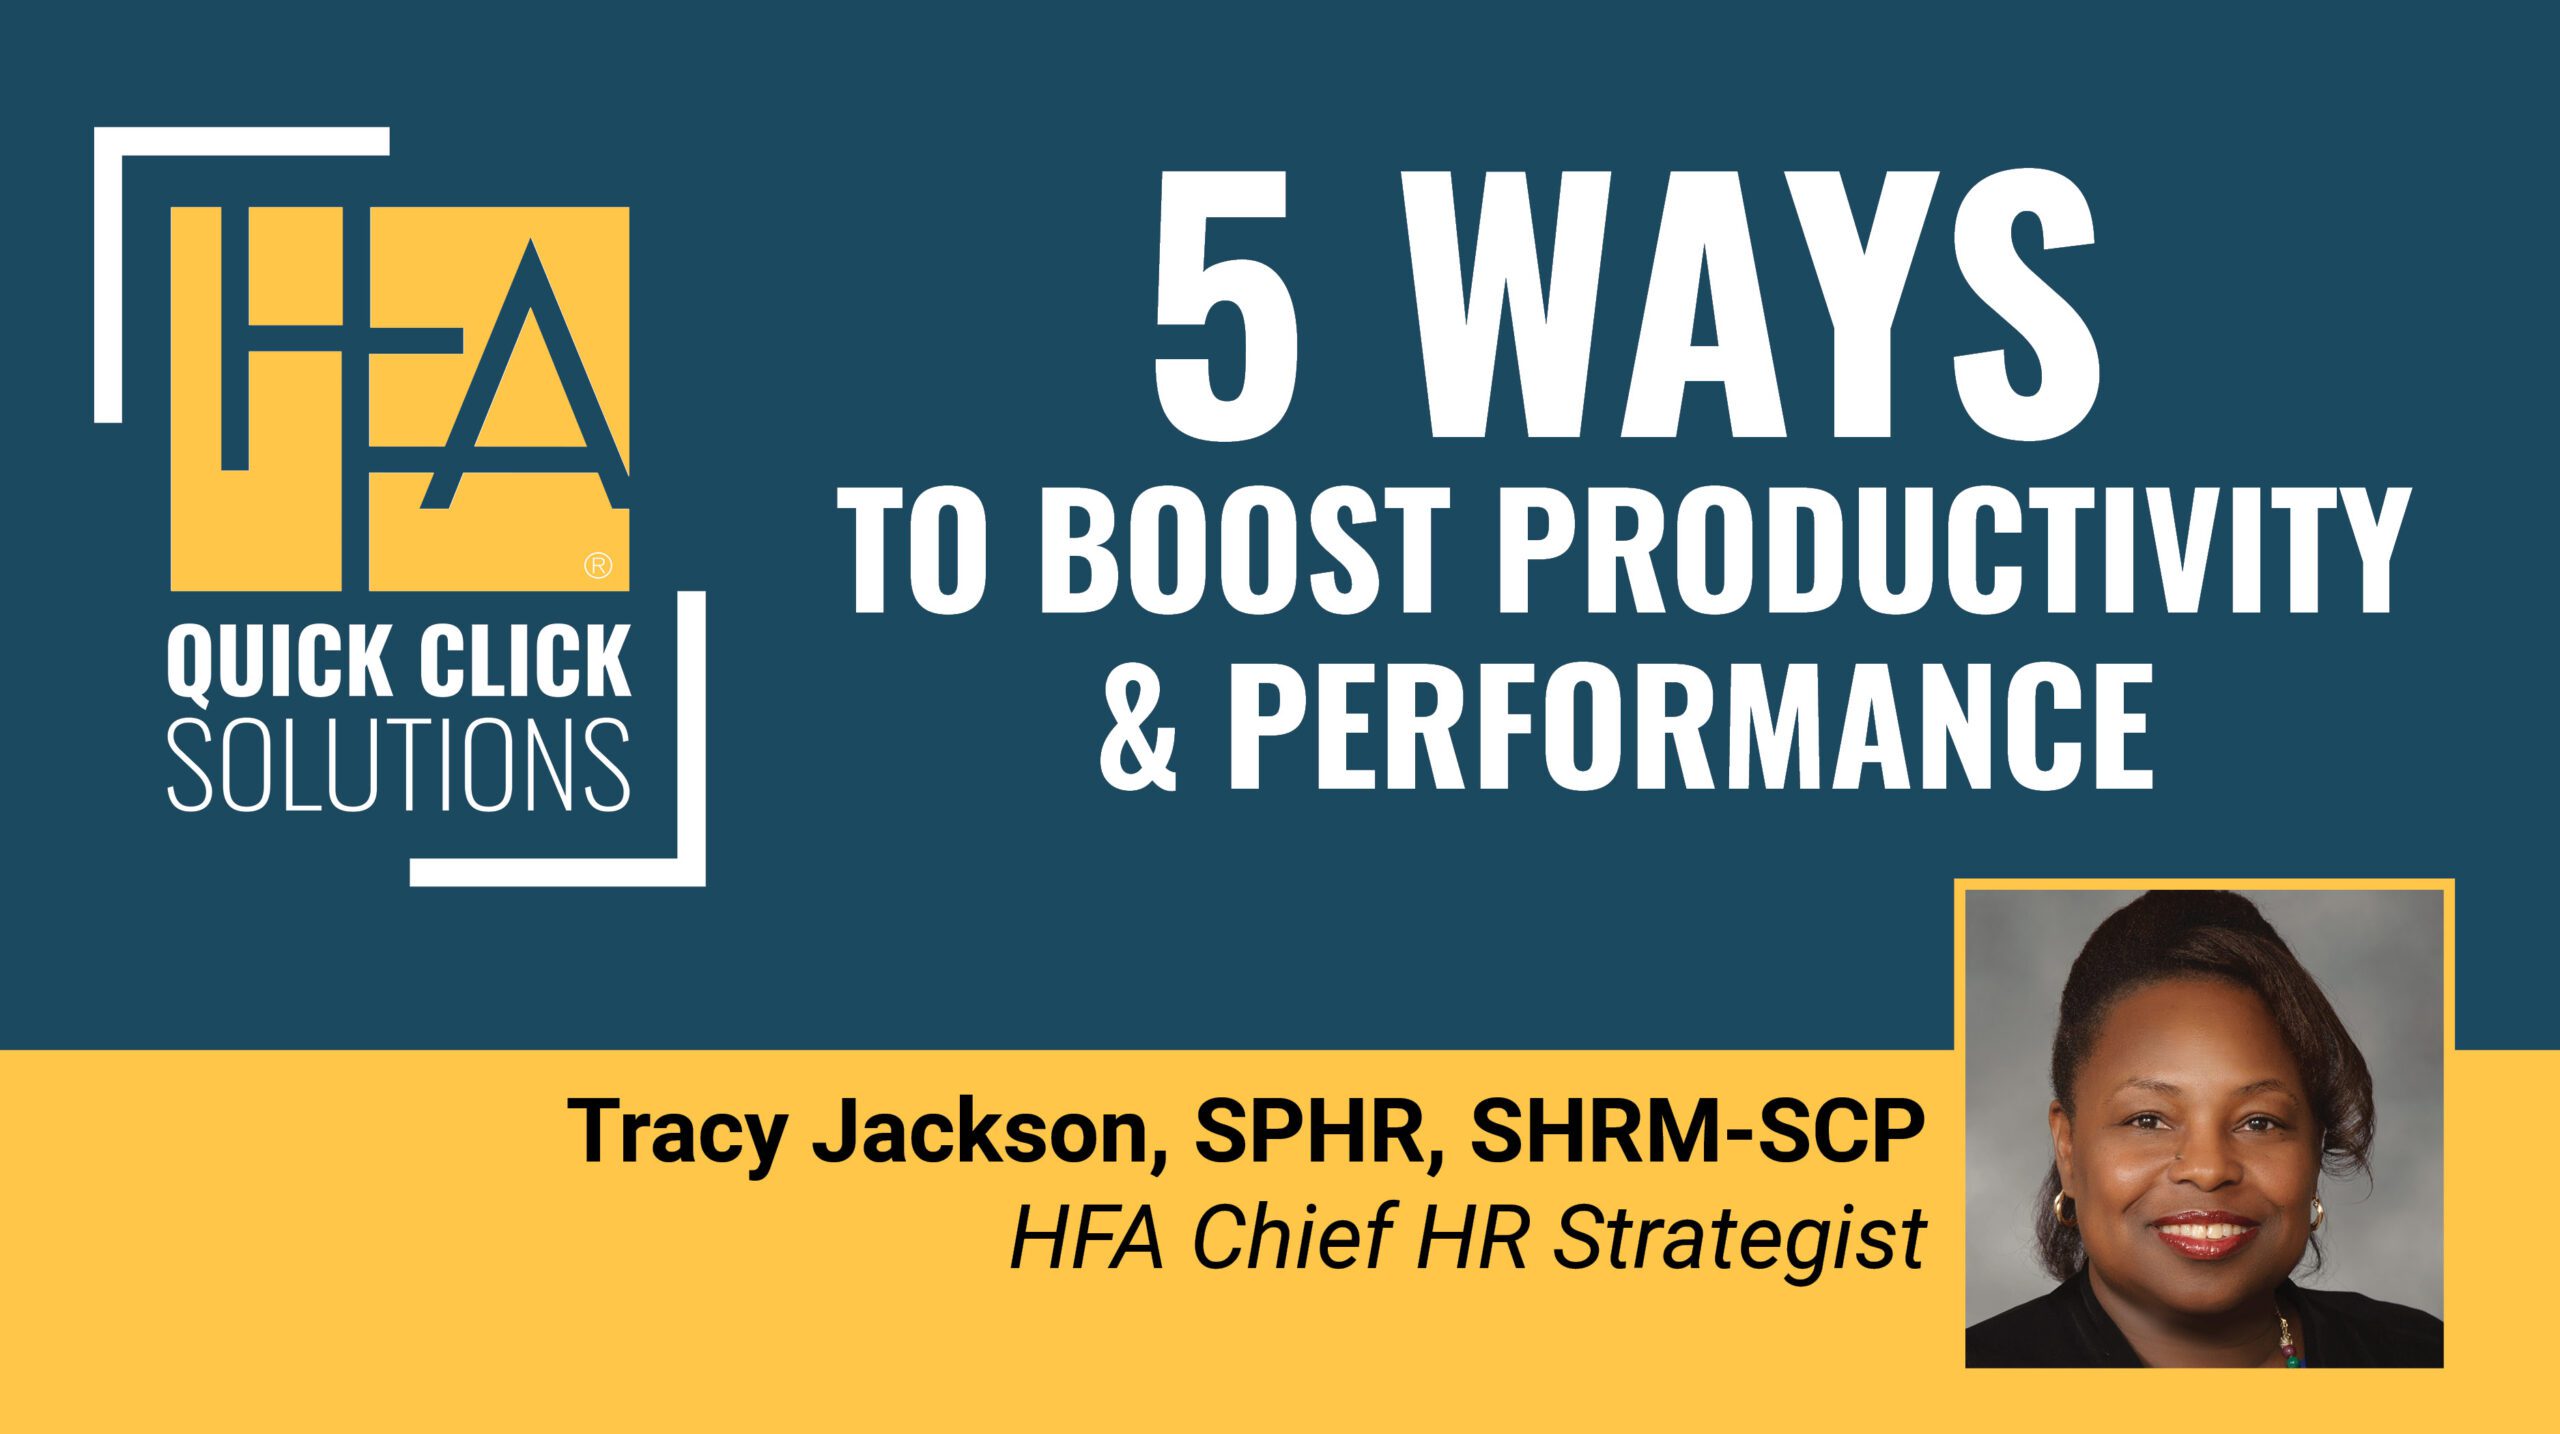 HFA-QCS 5 Ways to Boost Productivity and Performance